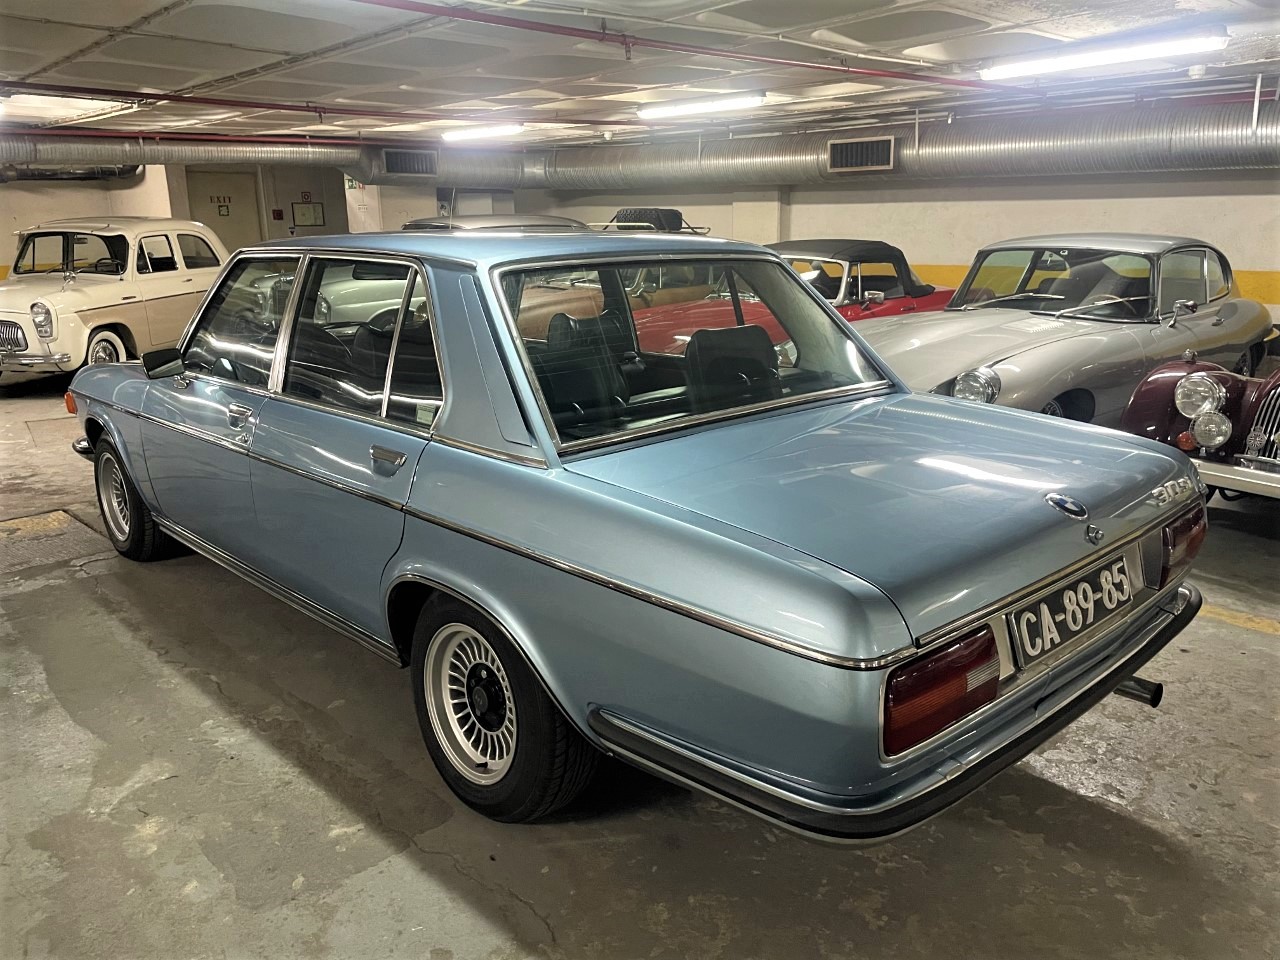 BMW 3.0 Si | The Collection Listings